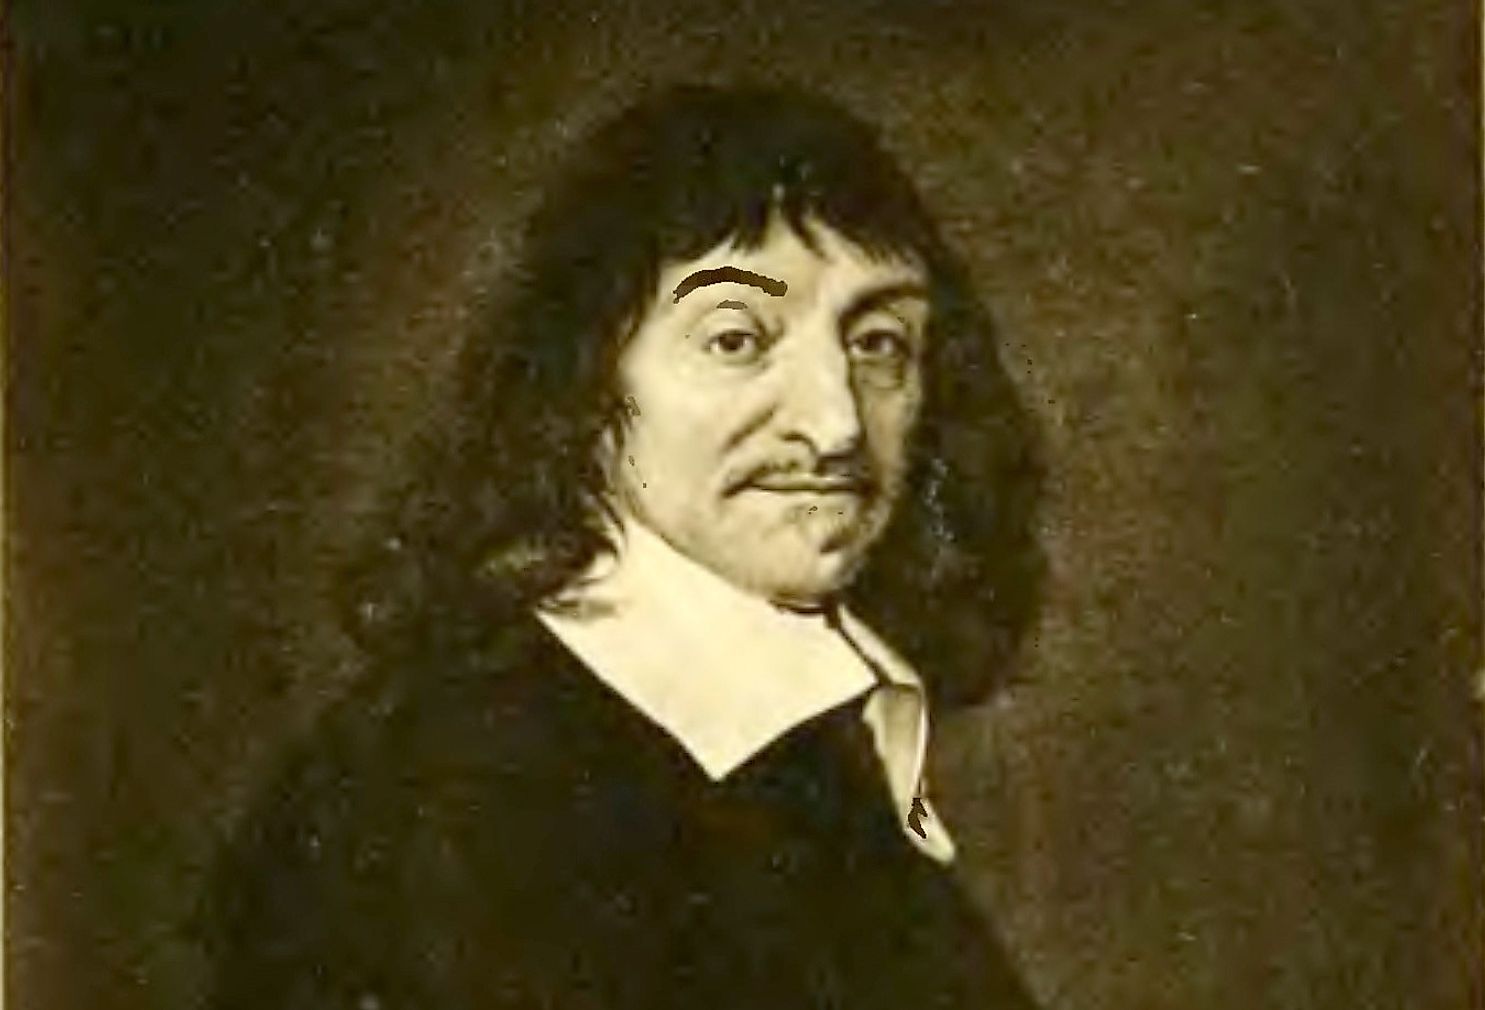 Portrait of René Descartes 1893, by Franz Hals. Image taken from the Louvre in France.